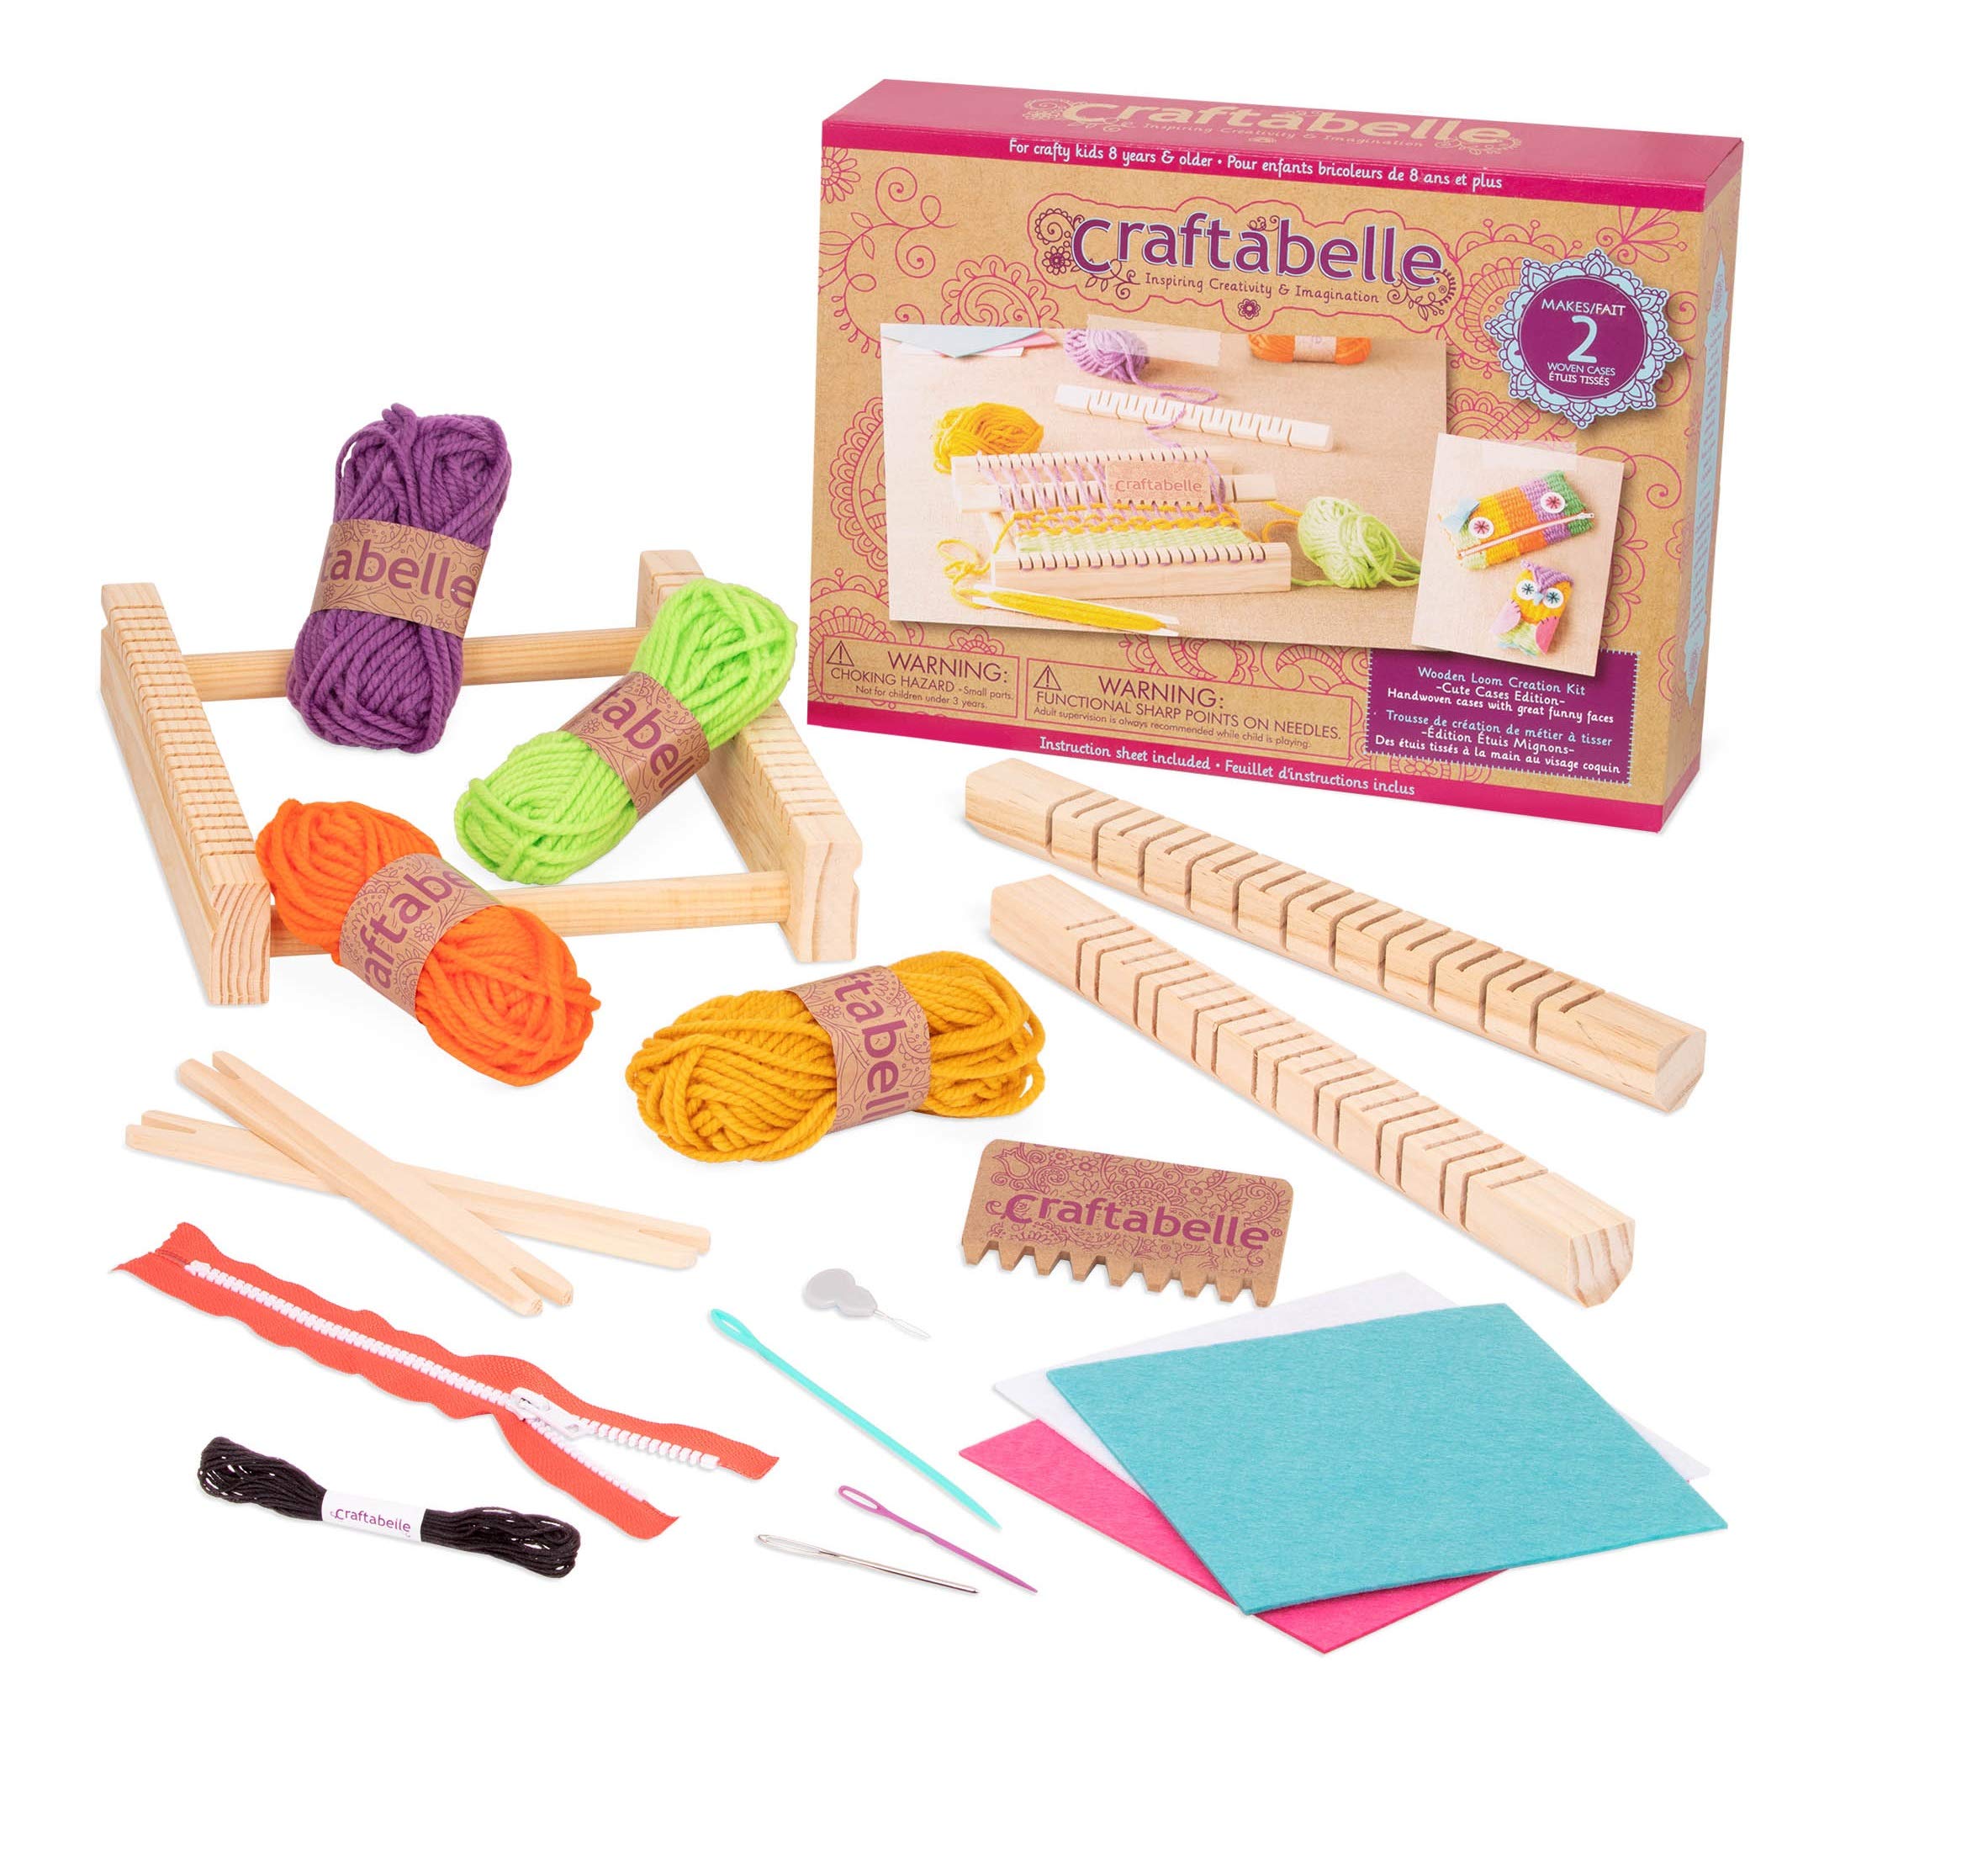 Craftabelle Wooden Loom Creation Kit Beginner Knitting Loom Kit 19pc Weaving  Set with Yarn and Frame DIY Craft Kits for Kids Aged 8 Years +